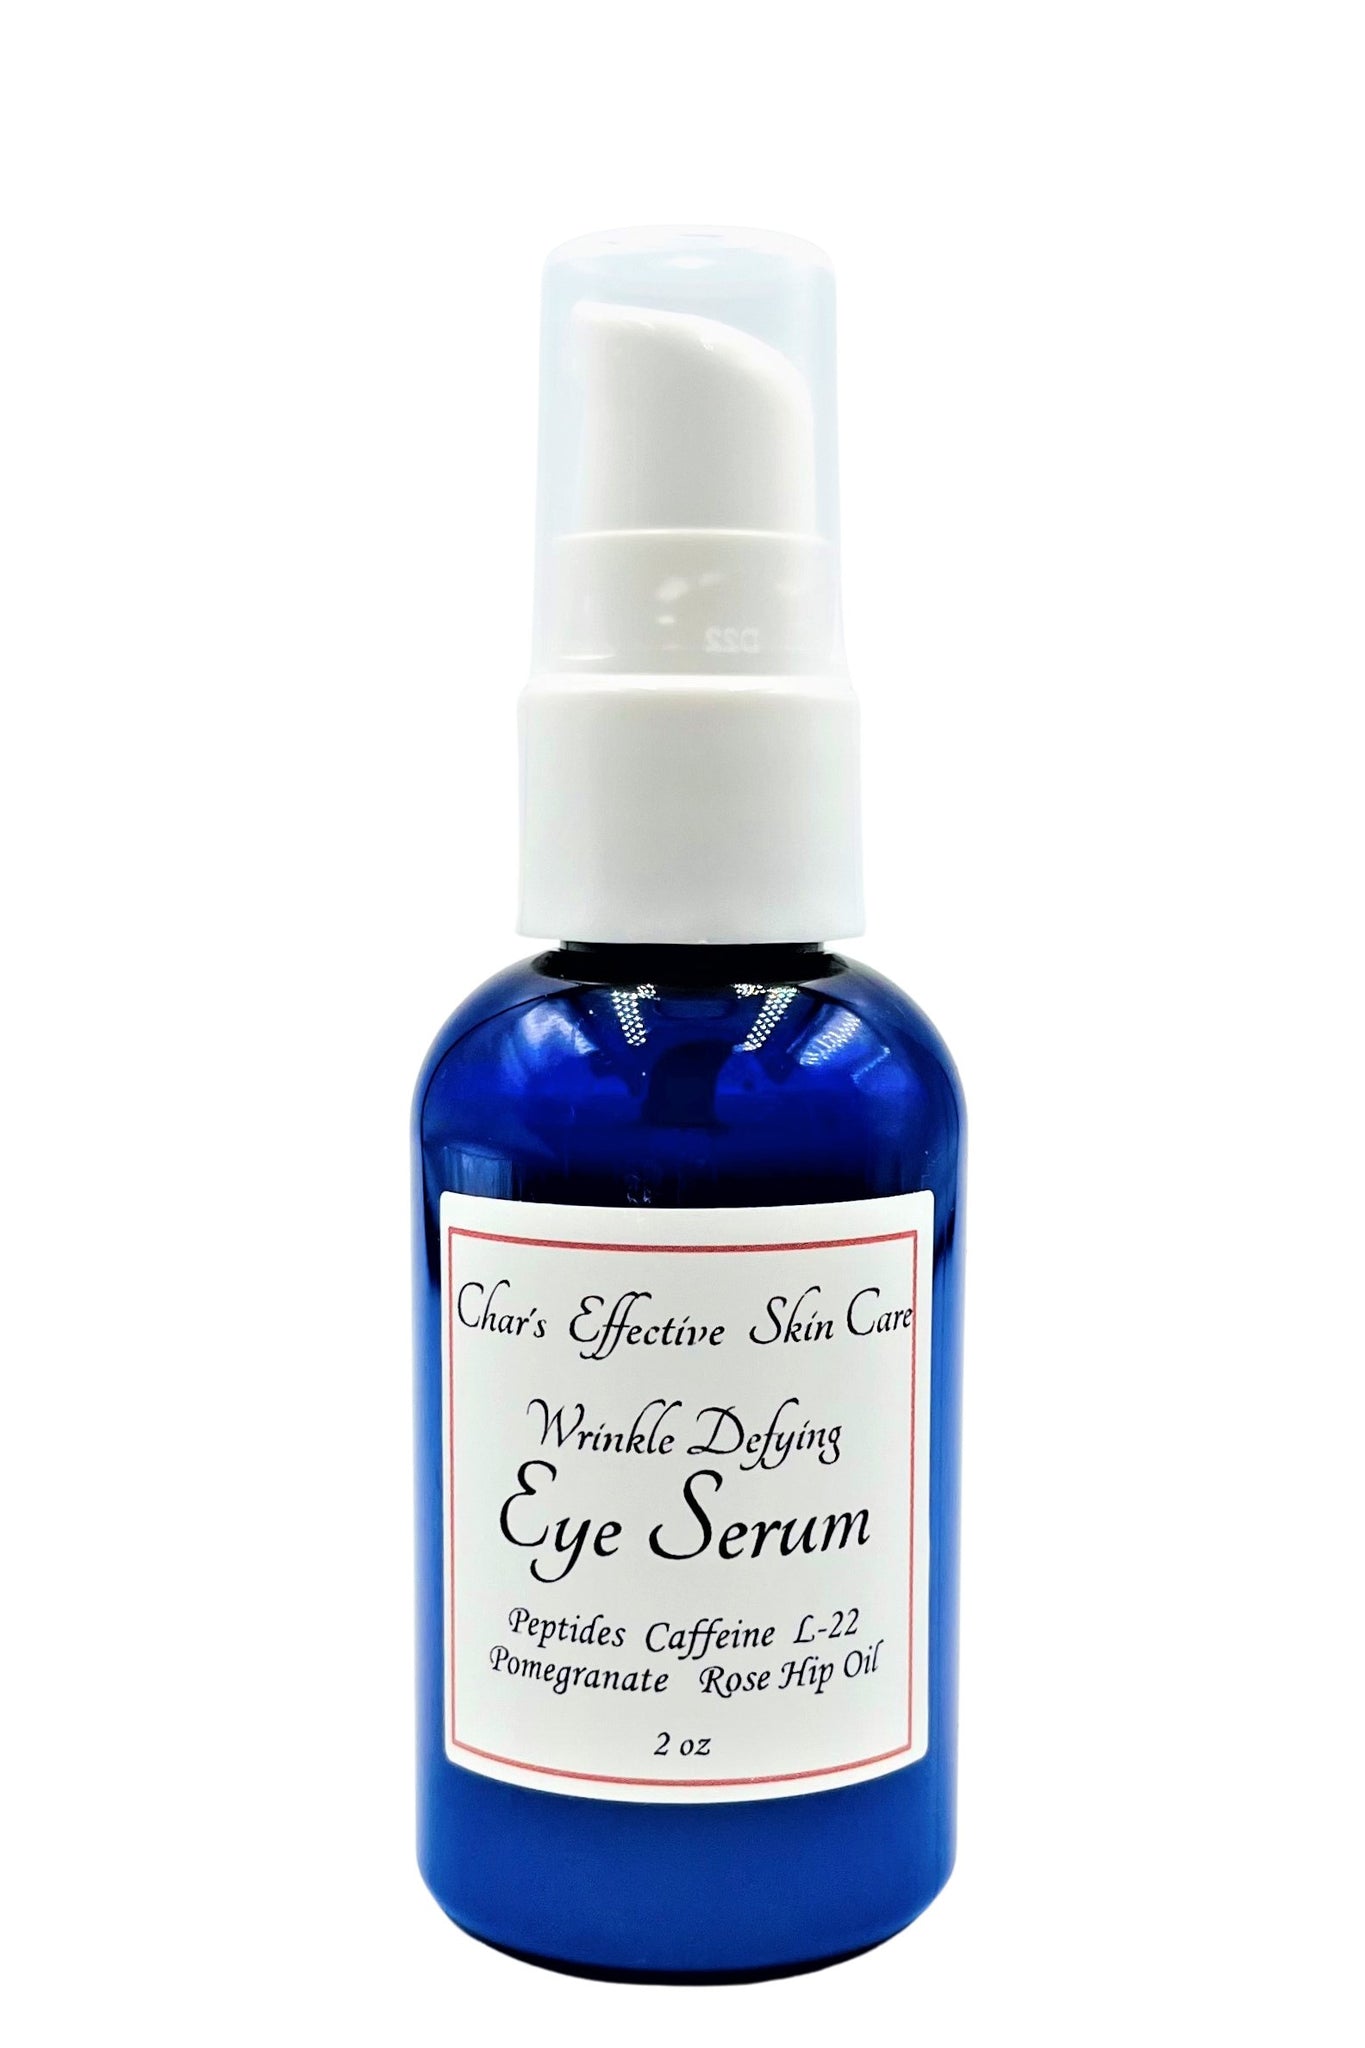 Wrinkle Fighting Eye Serum with Caffeine, Pomegranate & Matrixyl 3000 Peptide/2 oz Blue Bottle with White Treatment Pump/Char's Effectives Skin Care